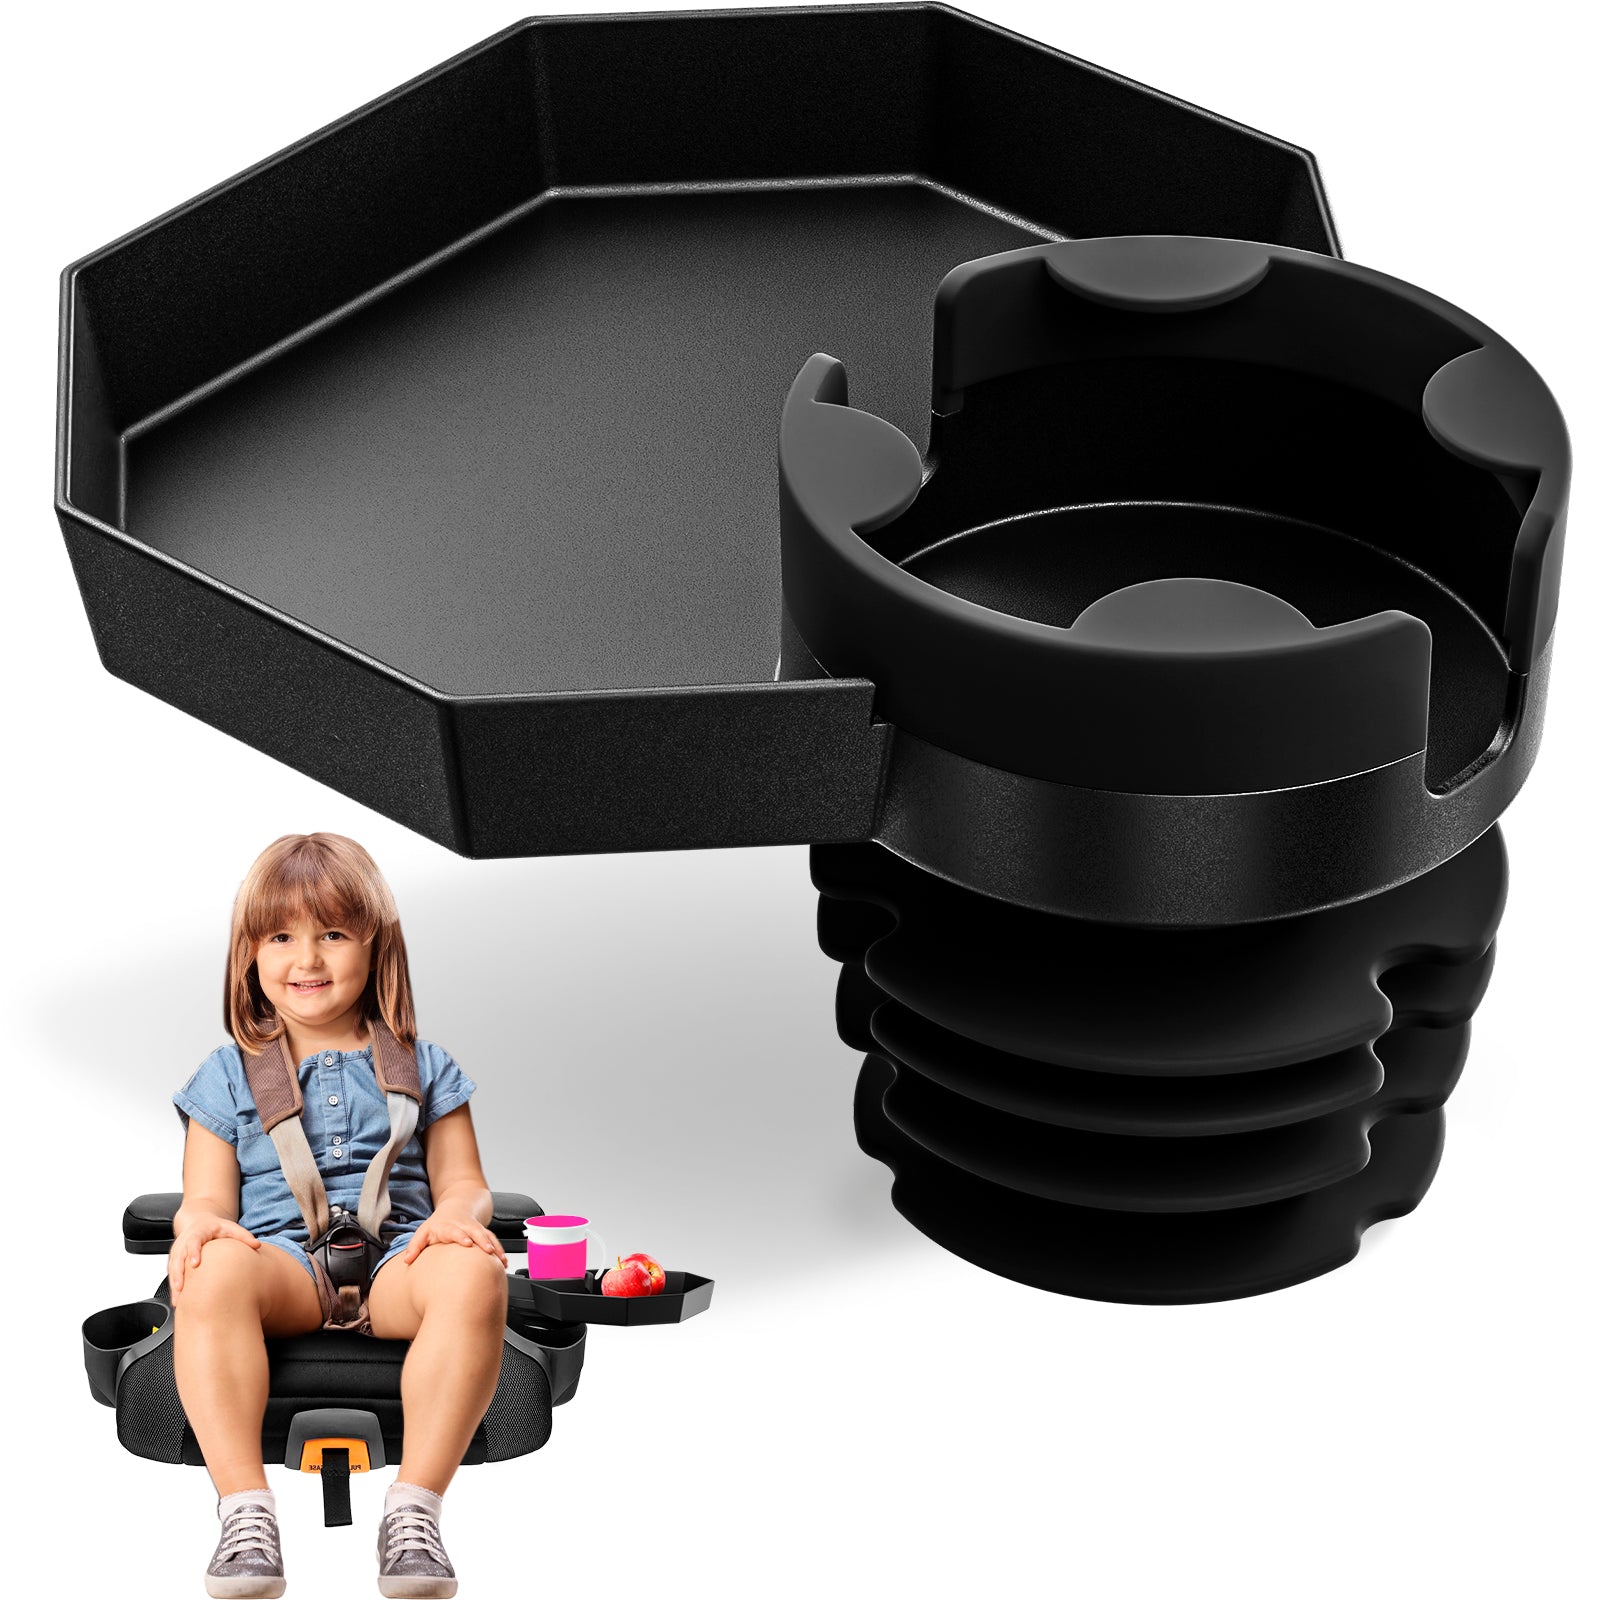 Universal Car Cup Holder Adjustable Car Meal Tray With Cup Holders